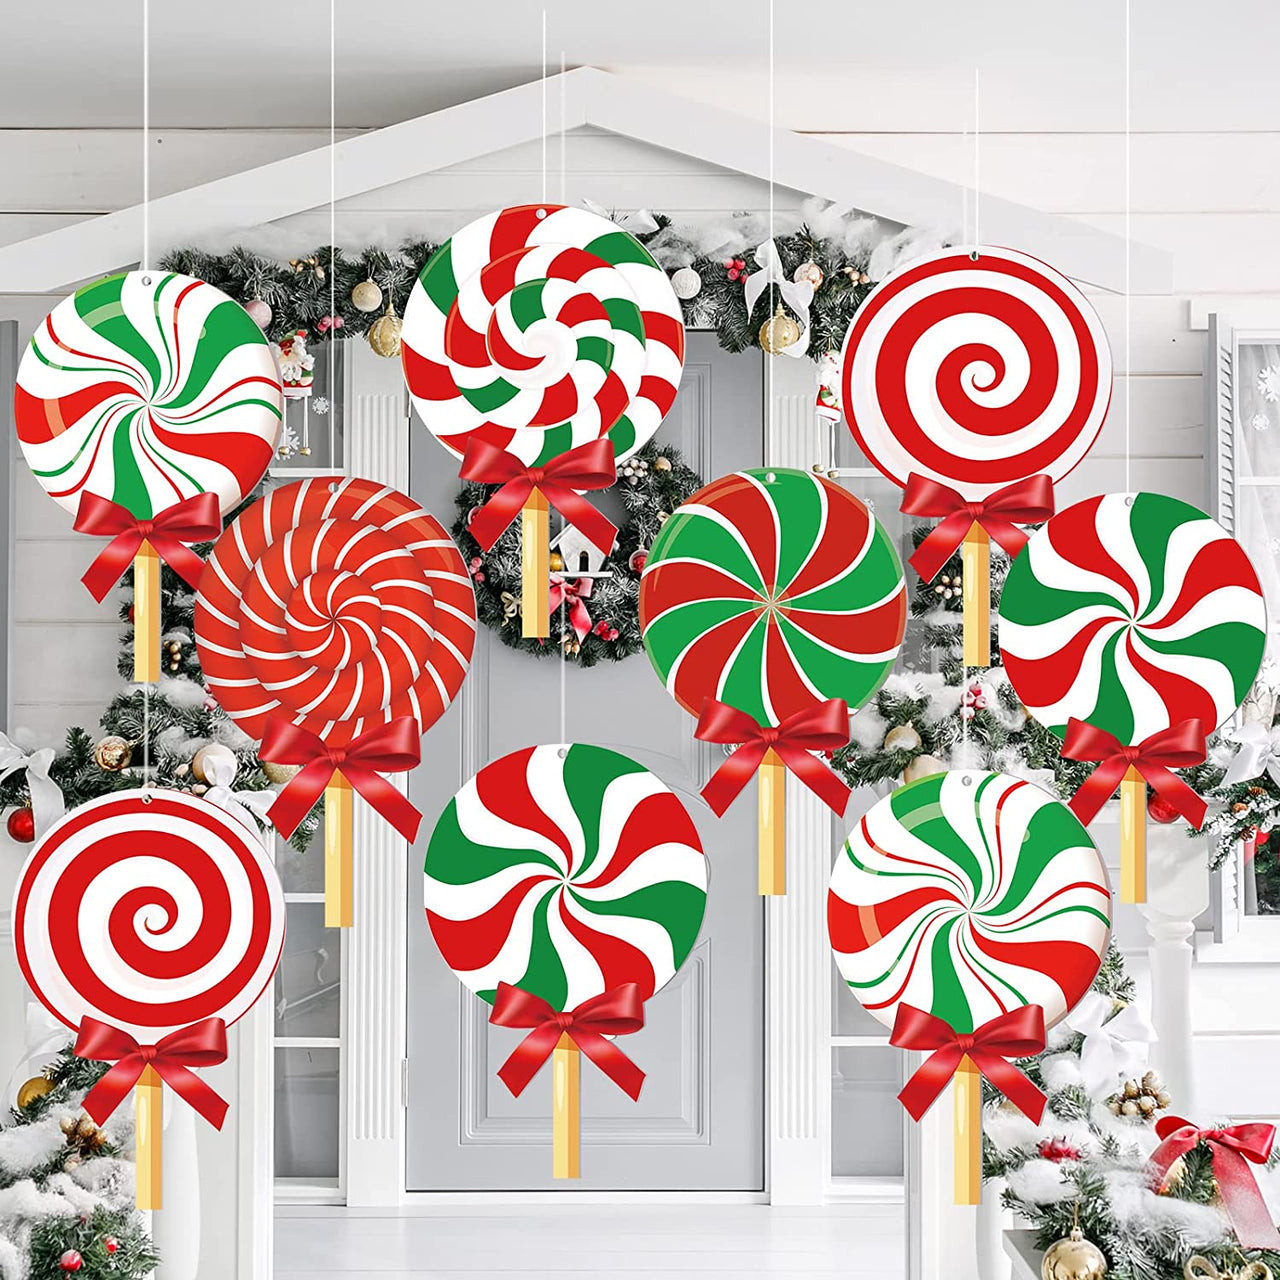 12 Pieces Christmas Yard Signs 16 Inch Outdoor Double Sided Lawn Candy Decorations Christmas Candy Hanging Ornaments Outside Holiday Party Porch and Tree Yard Lawn Home Office Decor